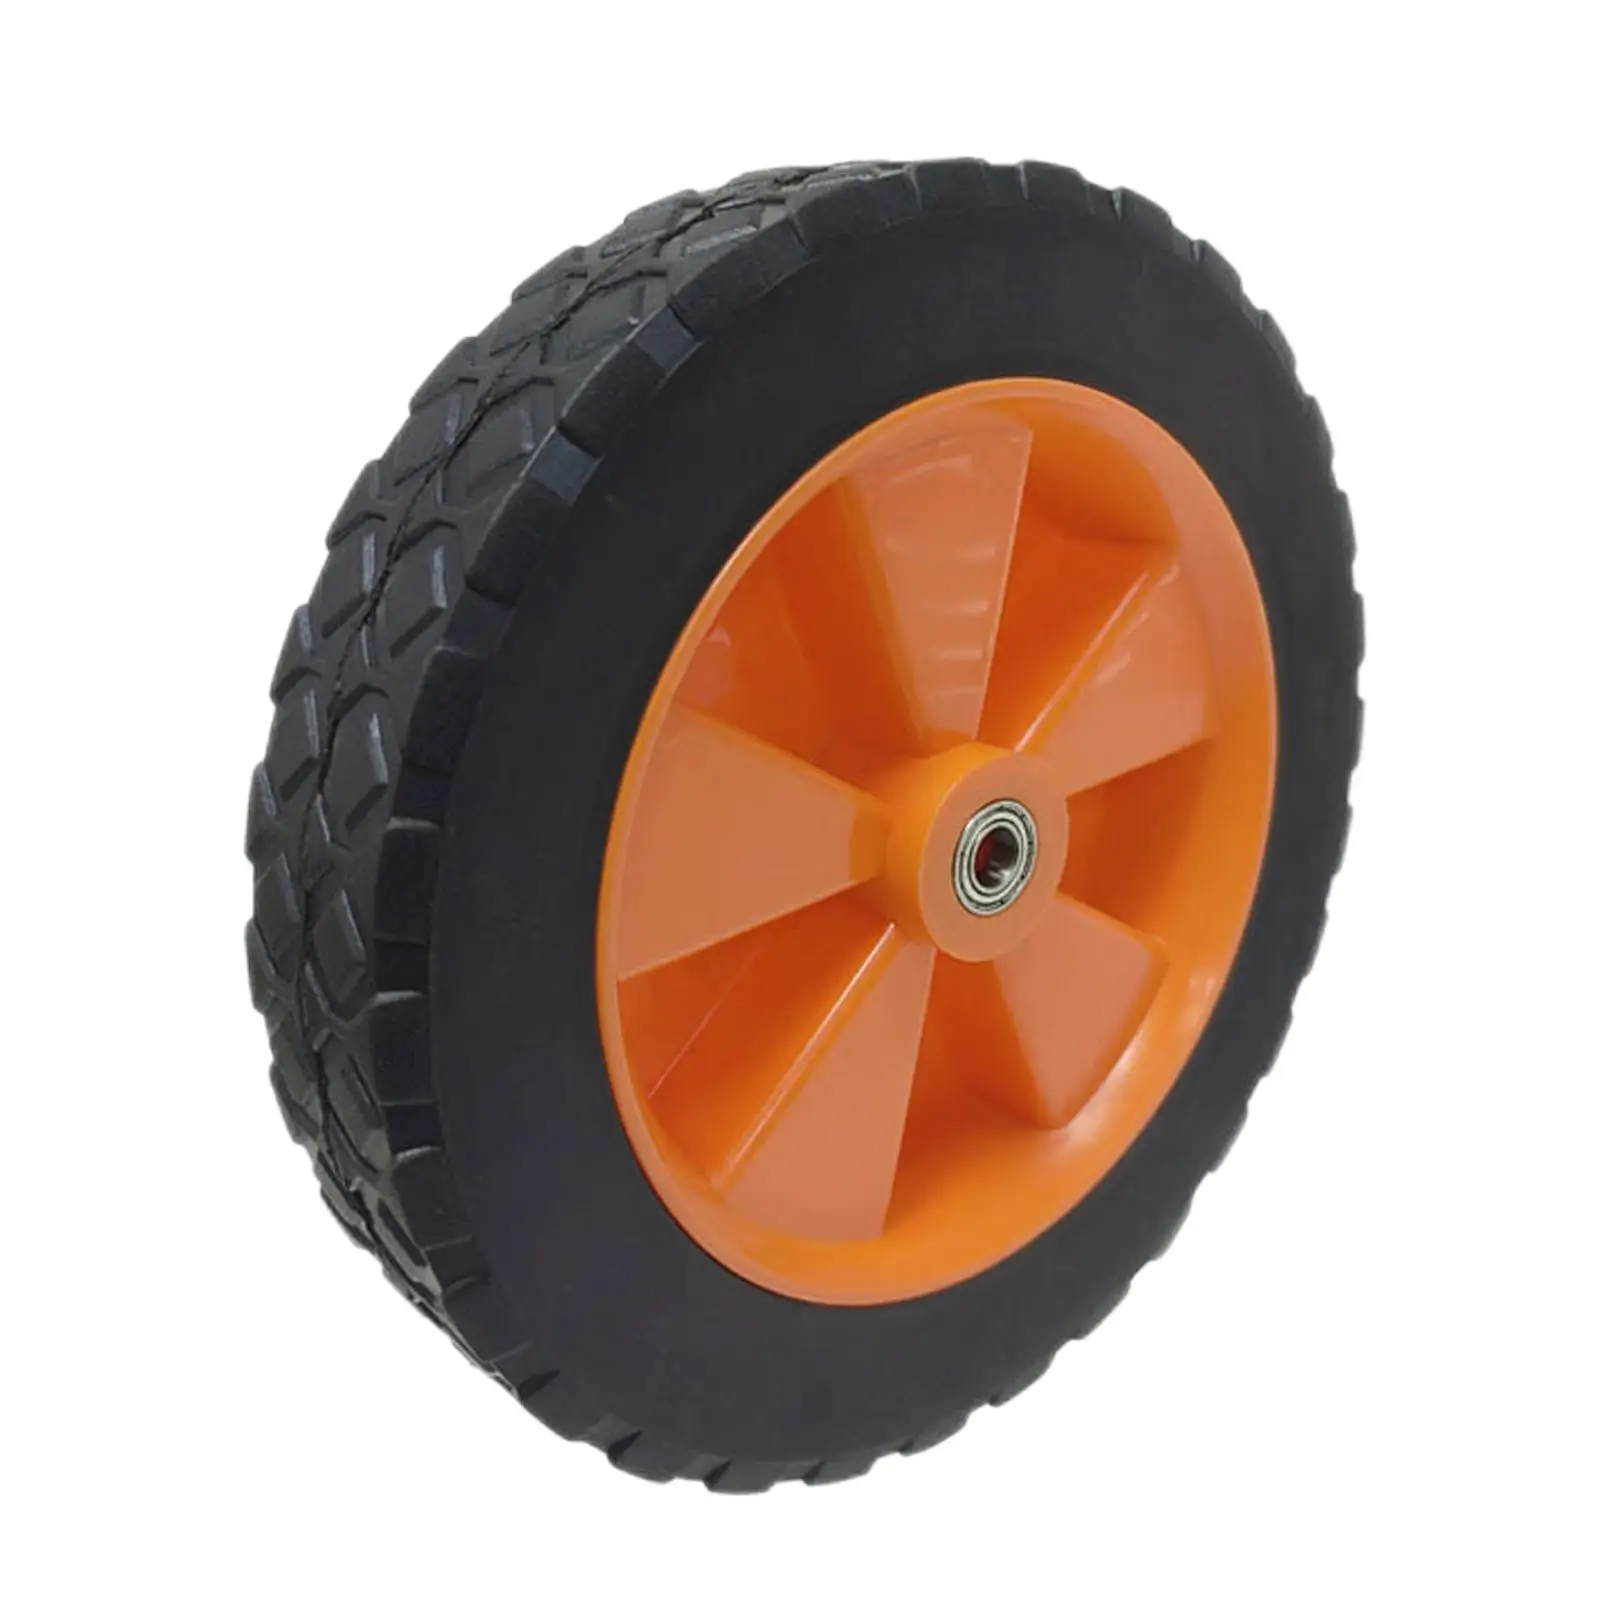 7 inch Collapsible Wagon Replacement Wheel for Utility  Cart